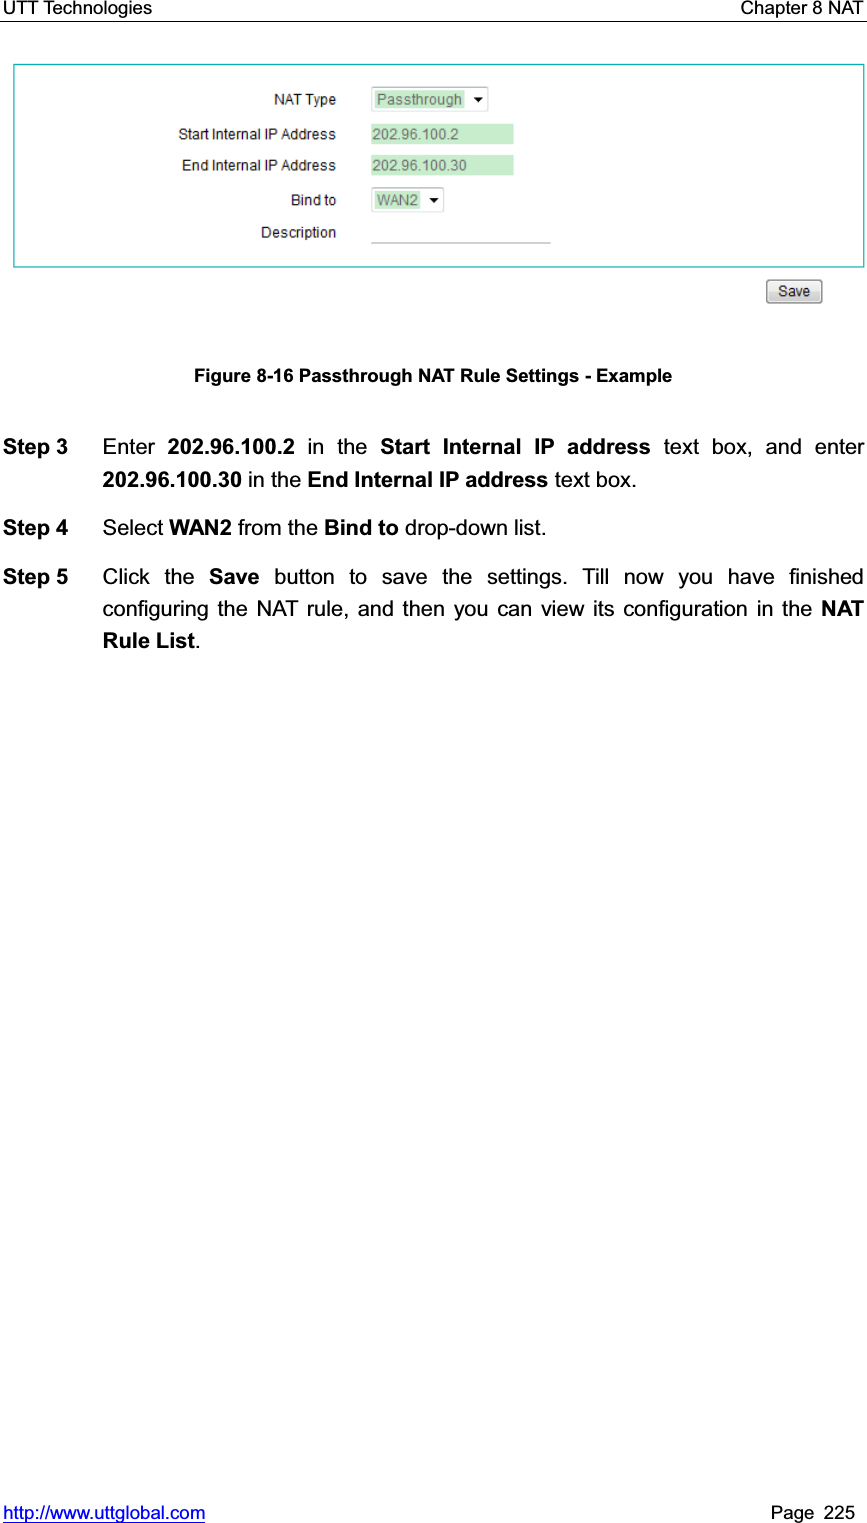 UTT Technologies    Chapter 8 NAT   http://www.uttglobal.com Page 225 Figure 8-16 Passthrough NAT Rule Settings - Example Step 3  Enter 202.96.100.2 in the Start Internal IP address text box, and enter 202.96.100.30 in the End Internal IP address text box. Step 4  Select WAN2 from the Bind to drop-down list. Step 5  Click the Save button to save the settings. Till now you have finished configuring the NAT rule, and then you can view its configuration in the NAT Rule List.